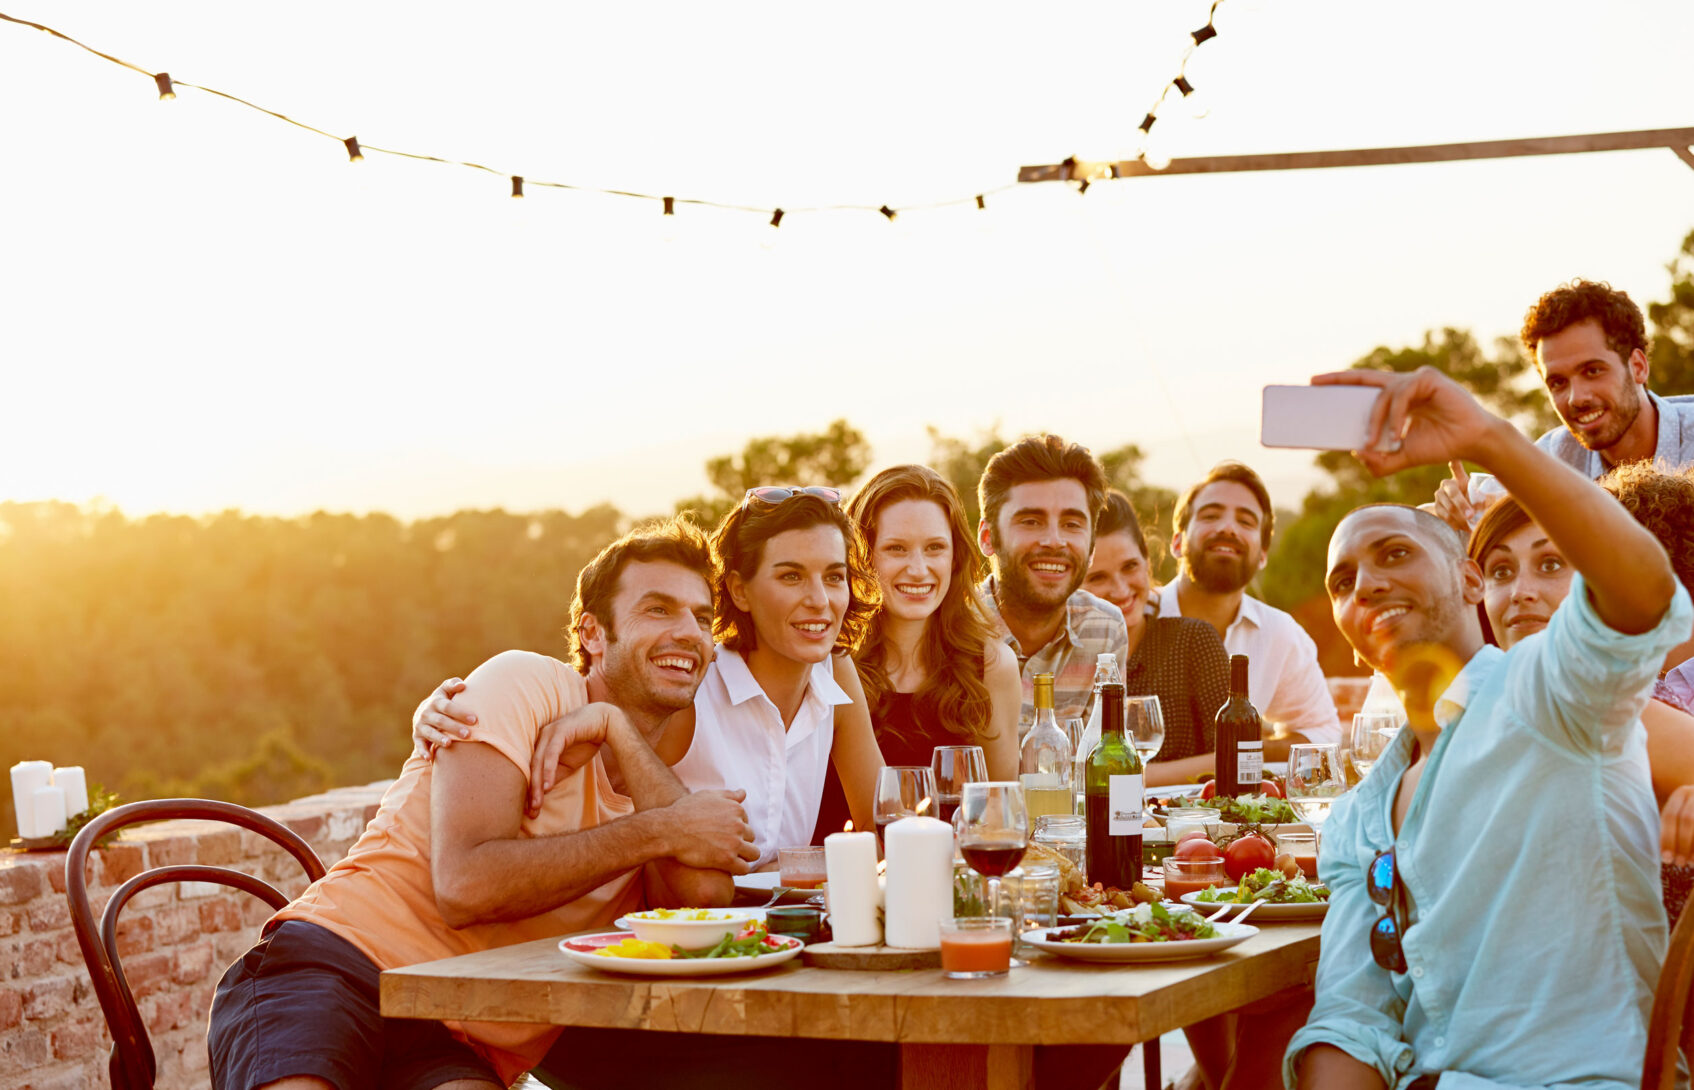 Friends take a selfie while having dinner outdoors